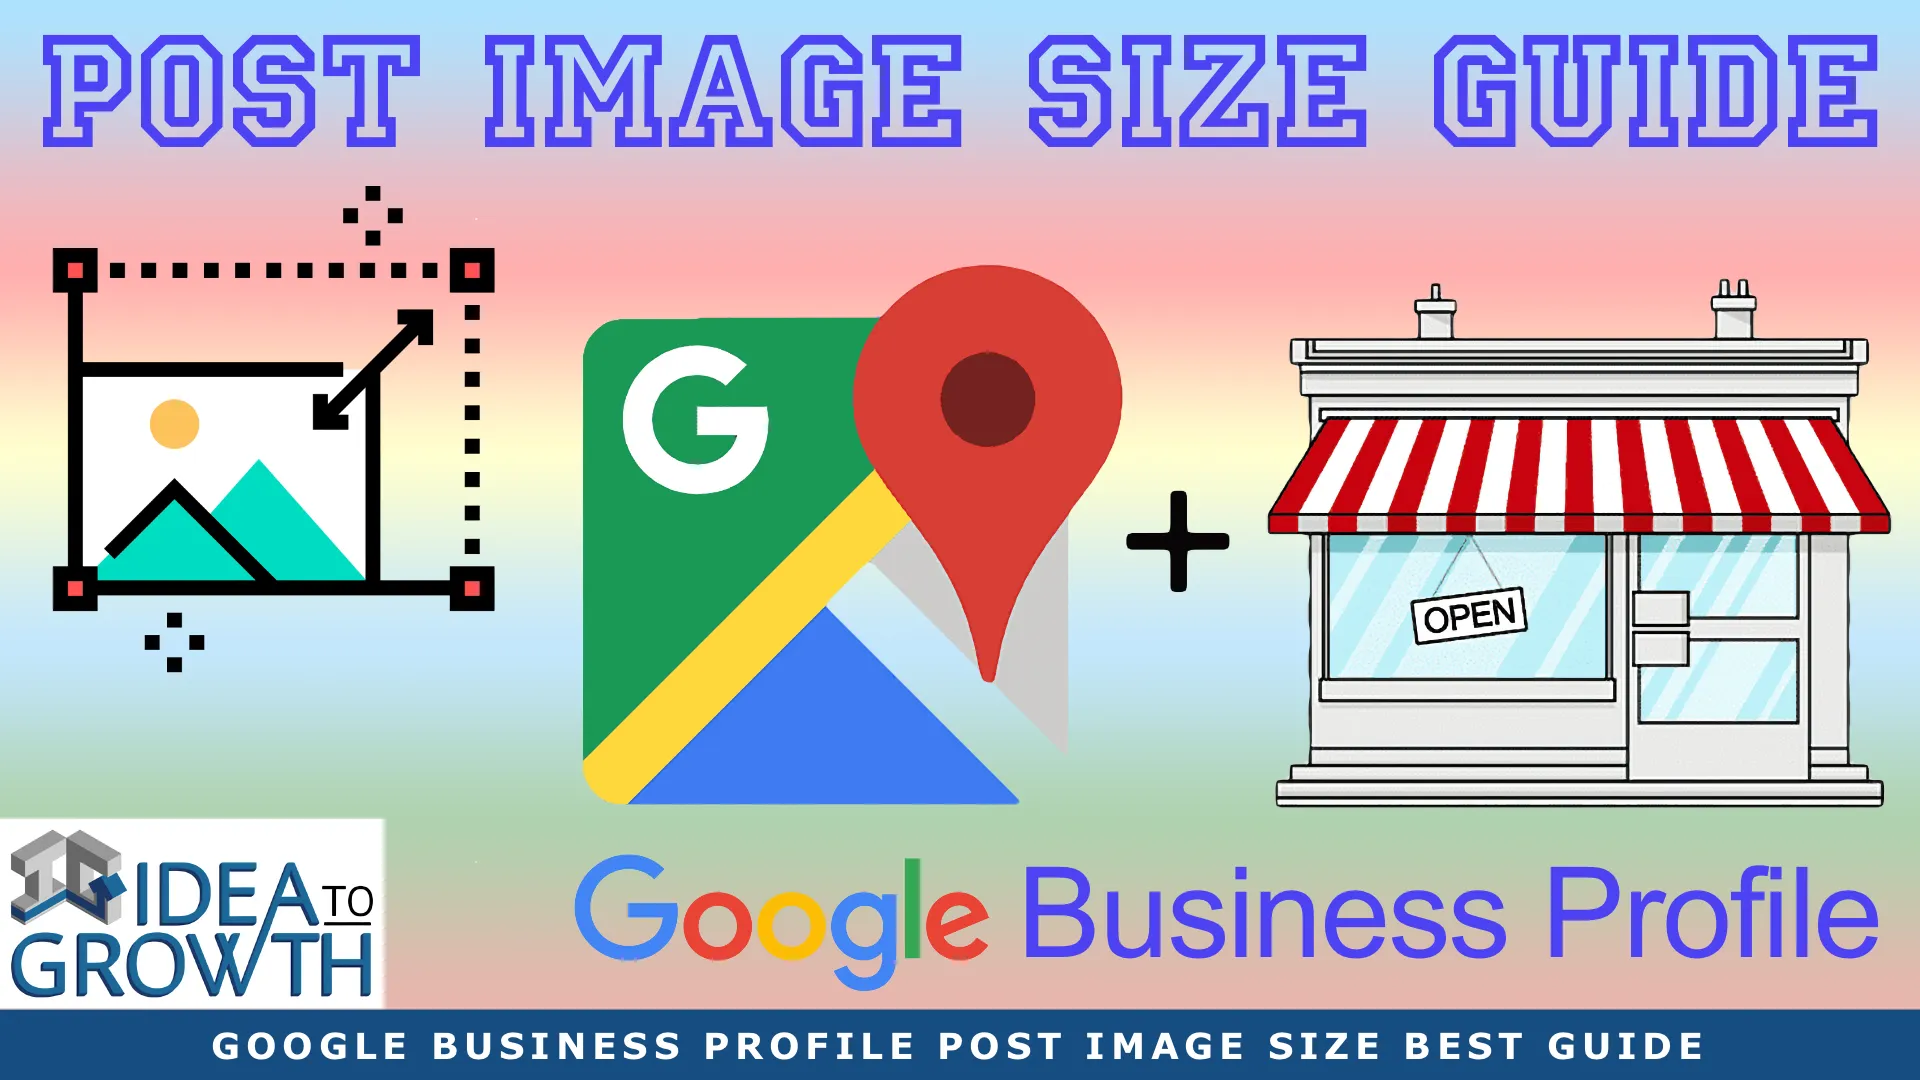 1 BEST GOOGLE BUSINESS PROFILE POST IMAGE SIZE GUIDE